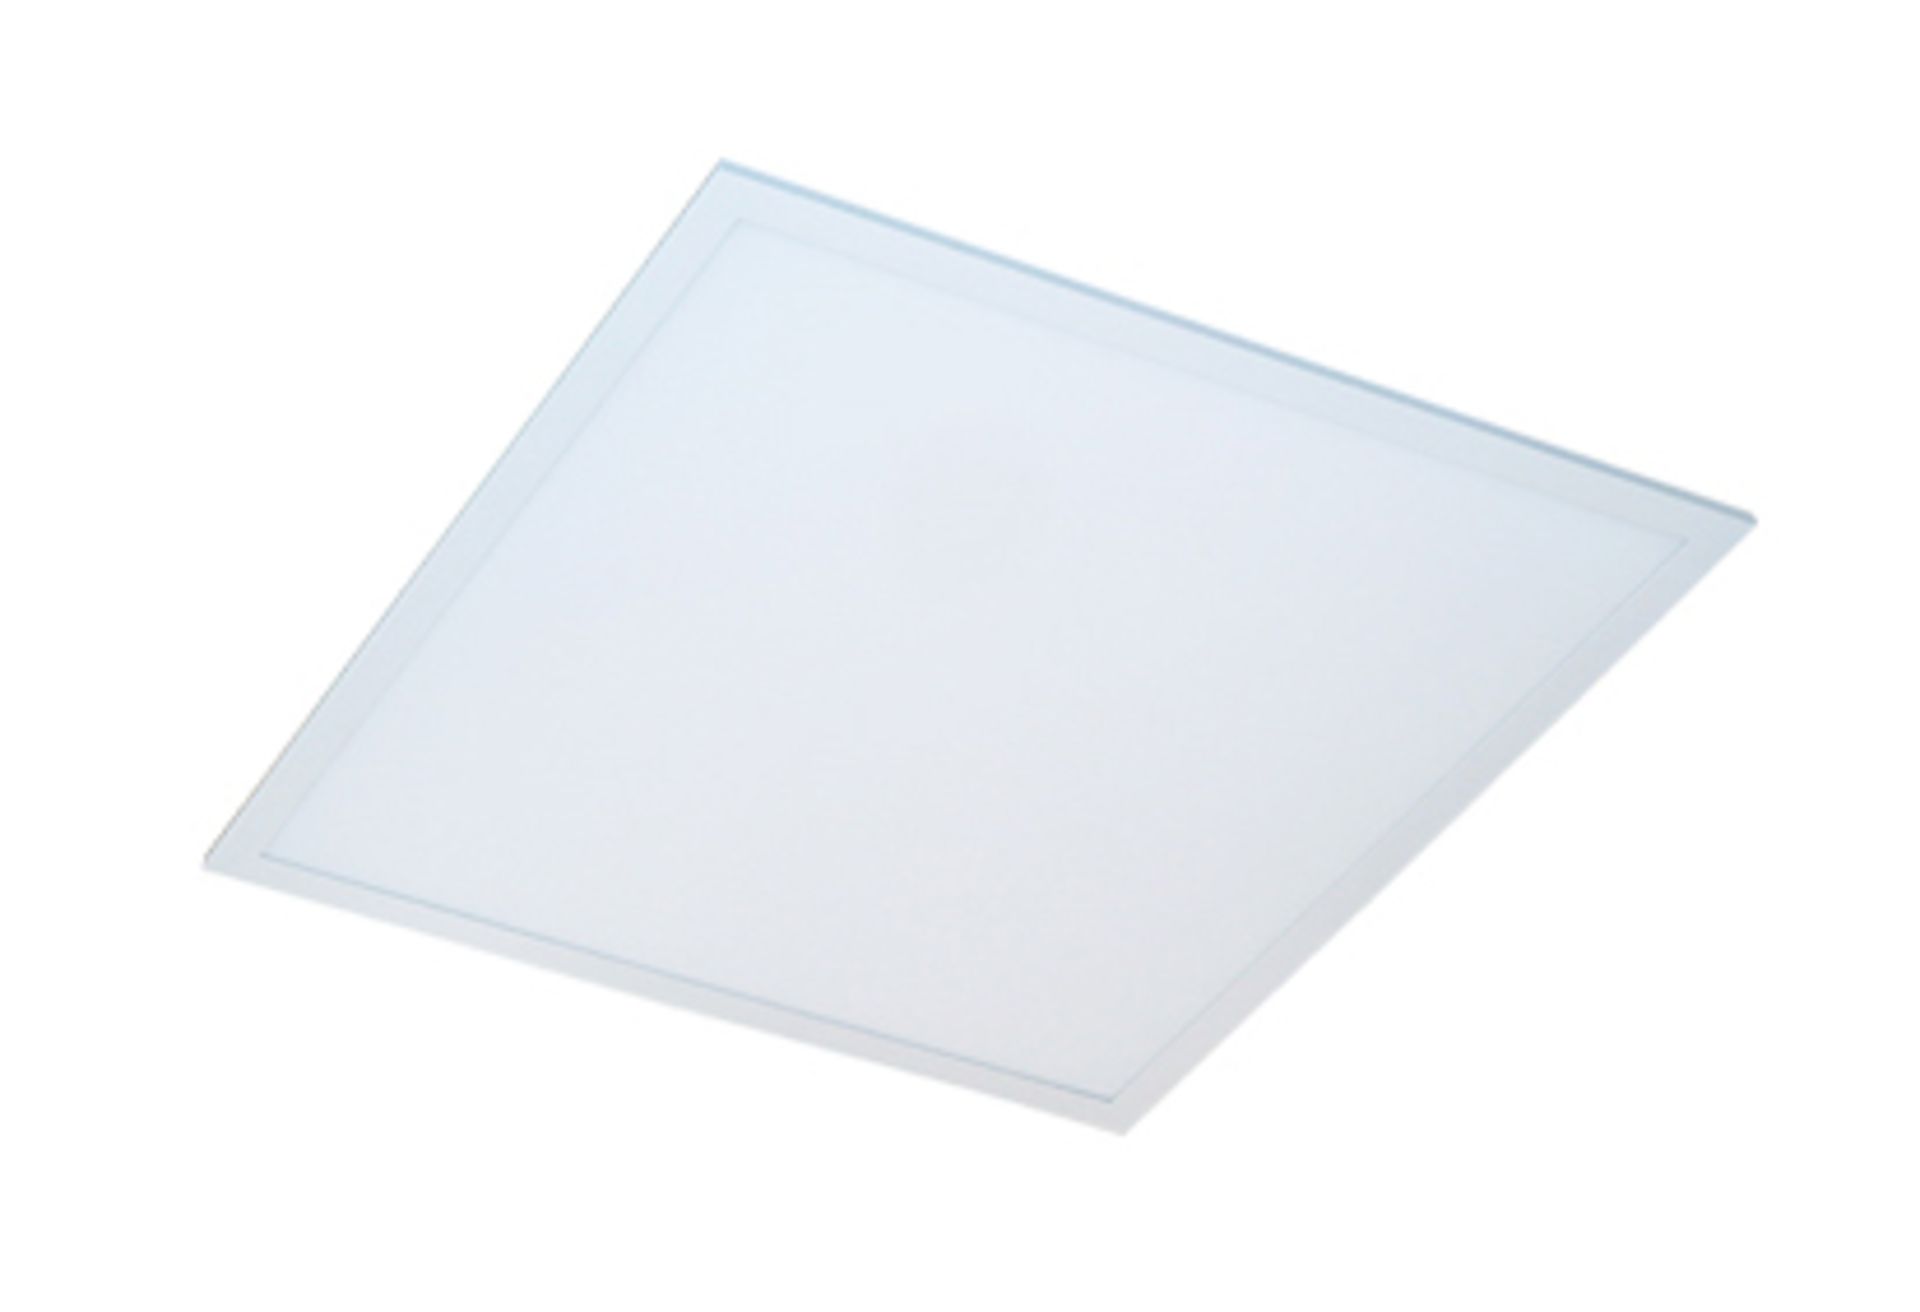 35 40w 4000LM LED Panels, product code T4LP4000-BC - Image 4 of 5